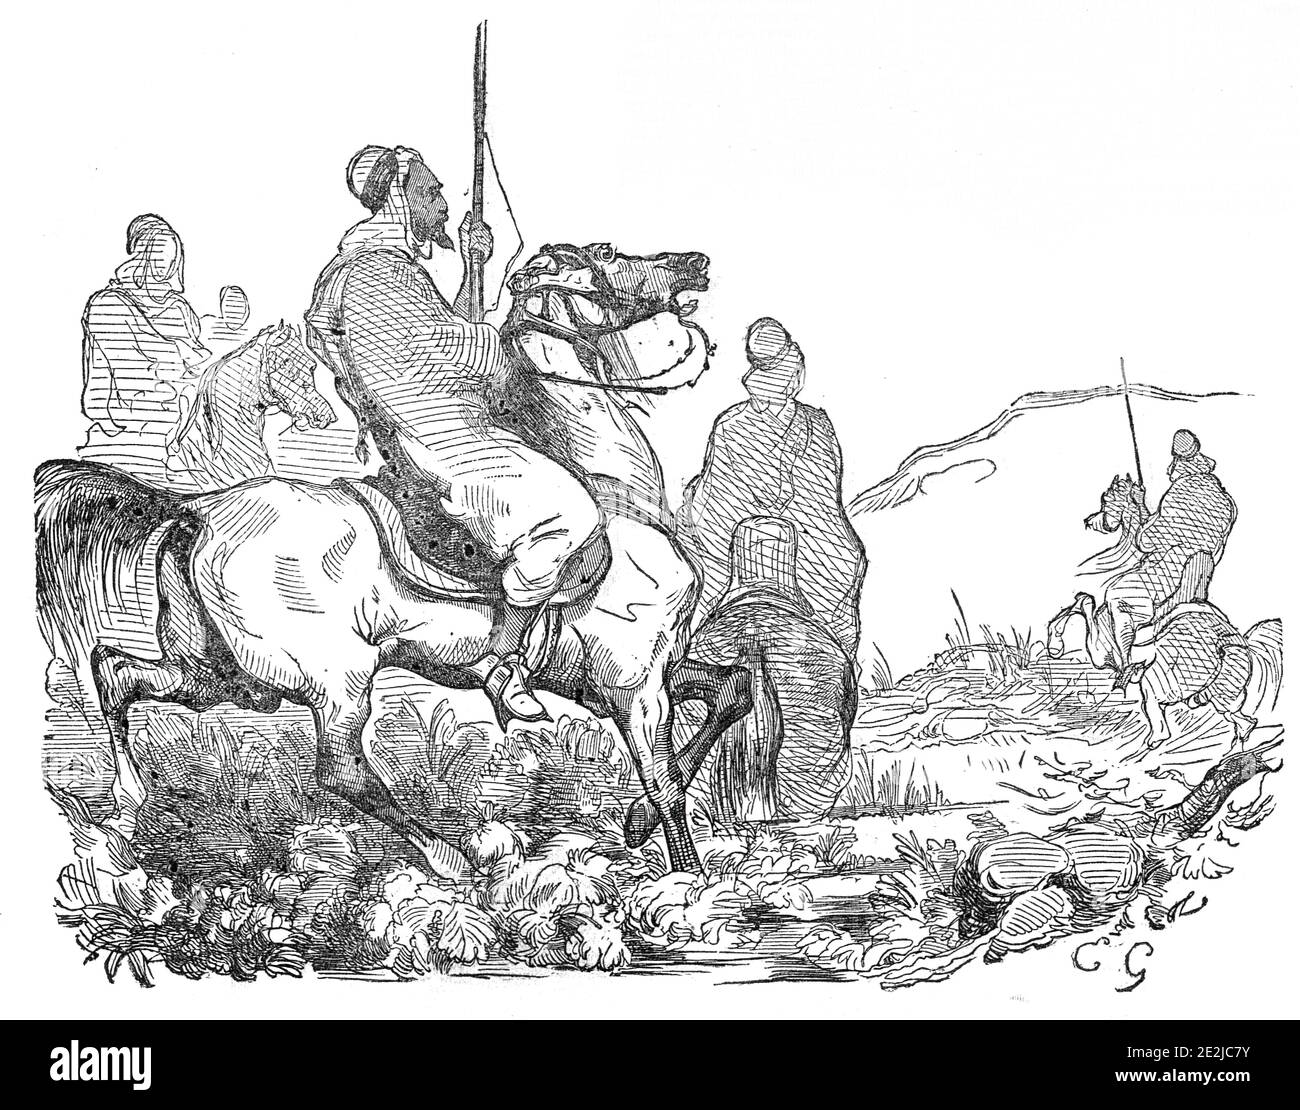 War in Morocco - Arab and Moorish Cavalry, 1844. 'The Emperor of Morocco has not a part in his dominions that might not be taken by a frigate and two bomb-vessels in less than four hours. His army is a farce, and their mode of warfare perfectly childish. The national finances are very trifling. The munitions of war are scanty. The ordnance is dangerously useless, and the art of gunnery is worse than Chinese...'. From &quot;Illustrated London News&quot;, 1844, Vol V. Stock Photo